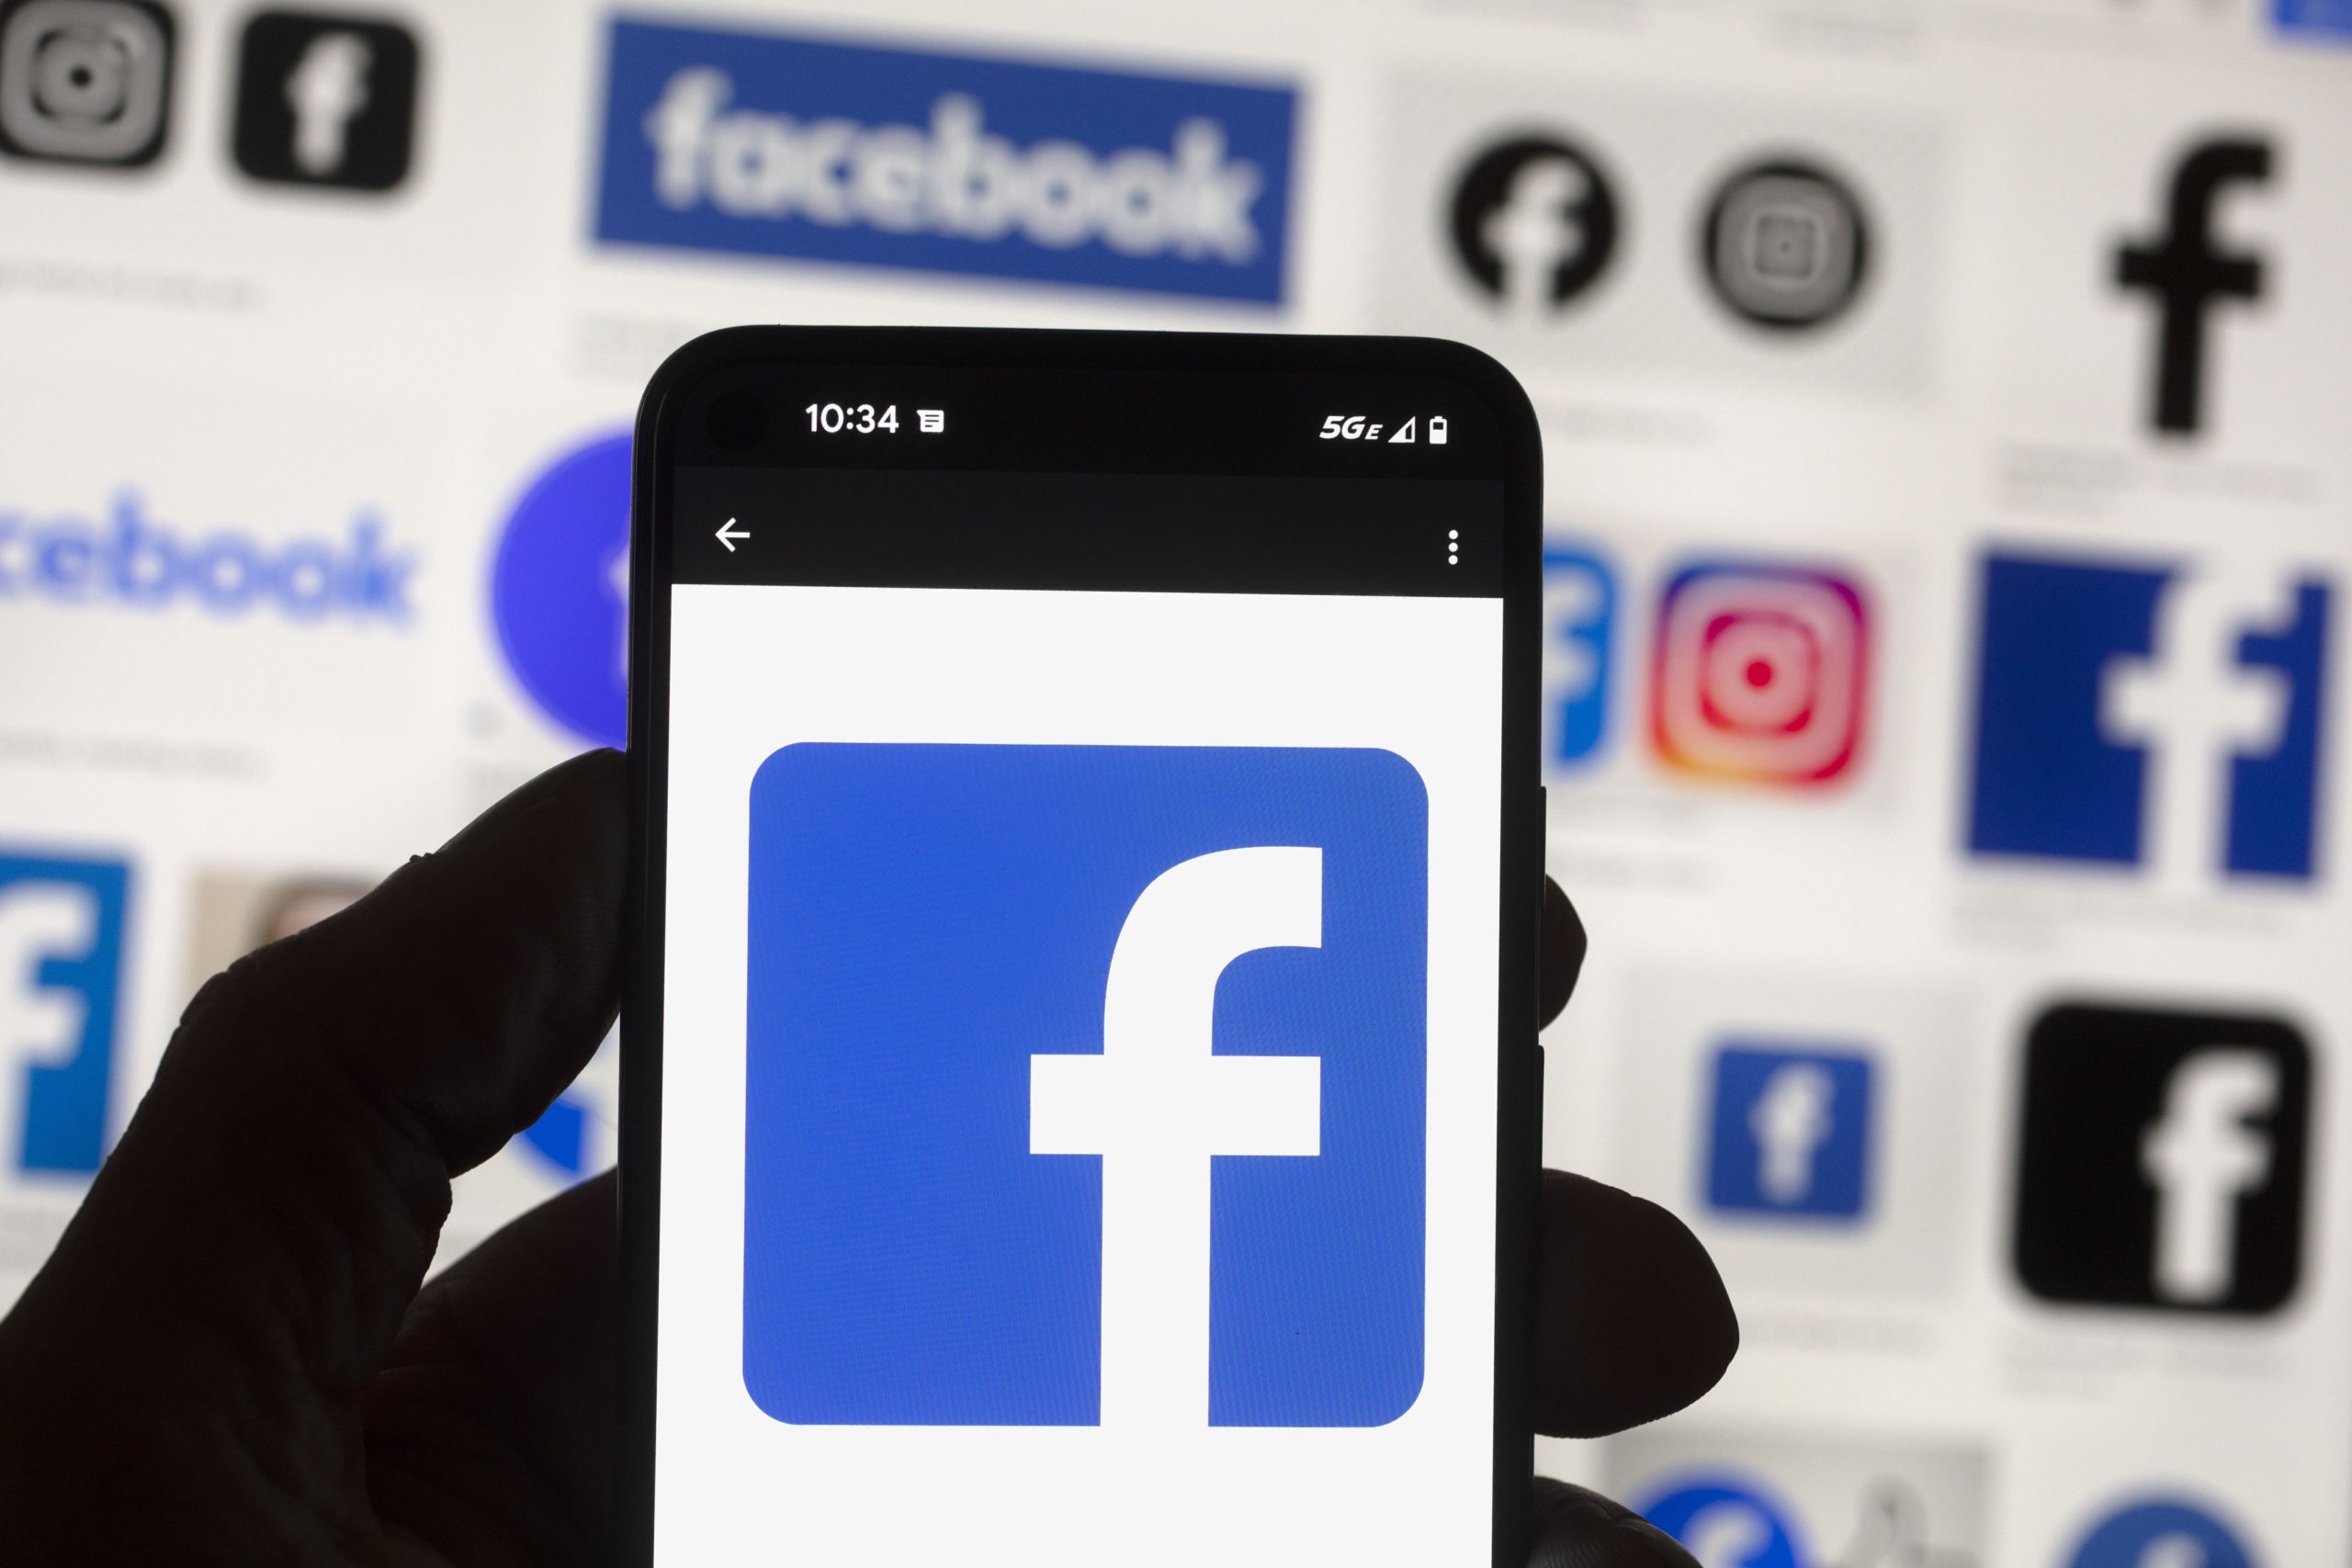 The Facebook logo is seen on a cellphone this month in Boston. A Washington state judge on Wednesday fined Facebook parent company Meta nearly $25 million.